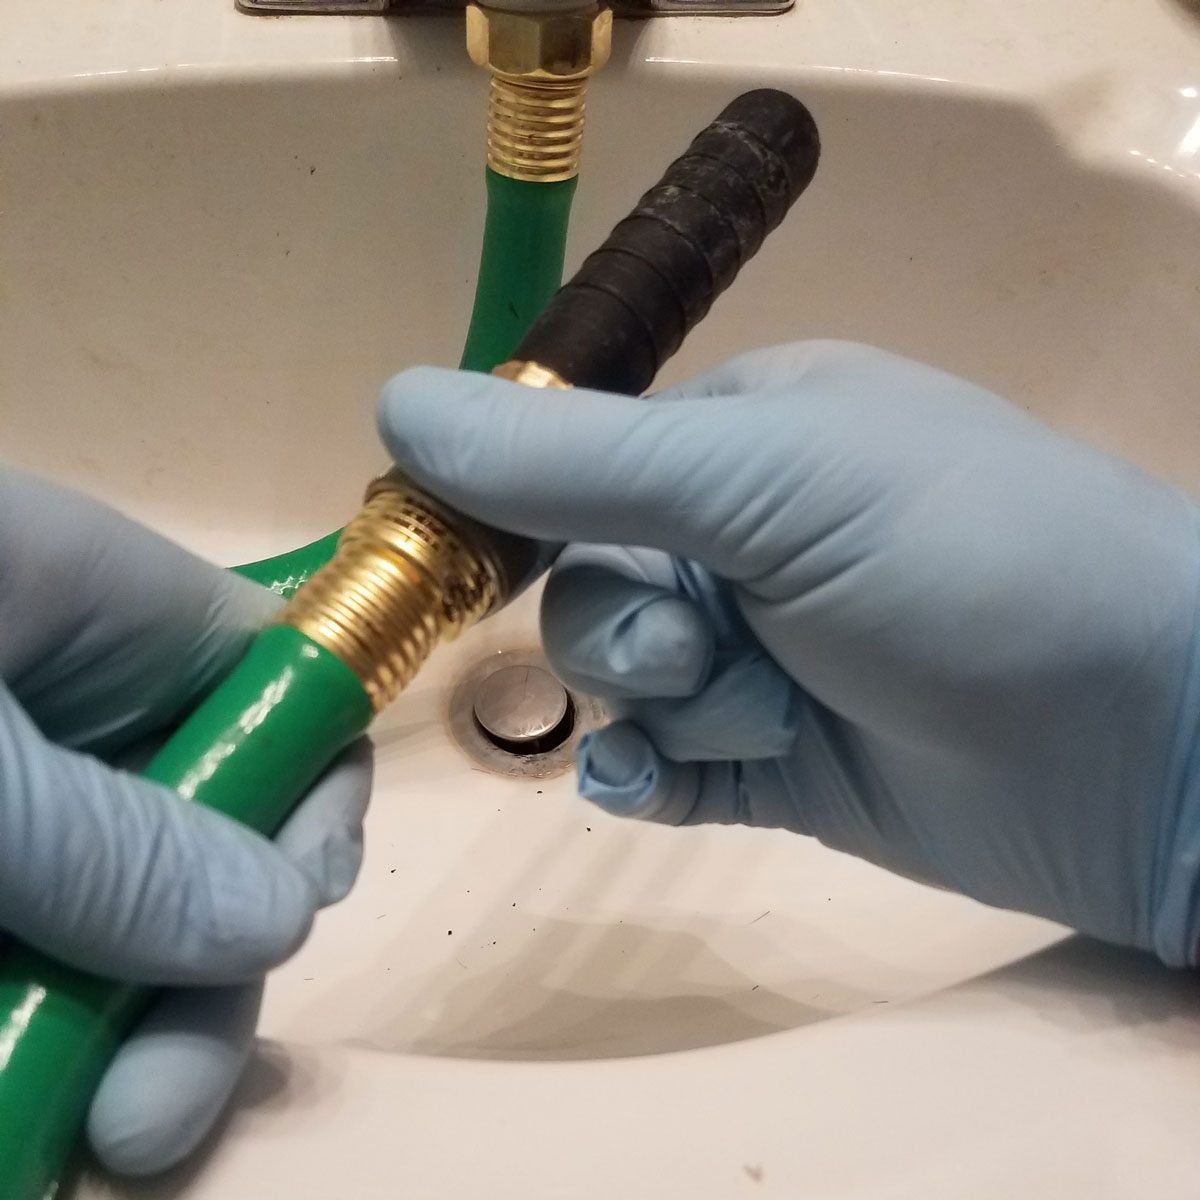 How to Use a Drain Bladder to Blast Any Sink Clog